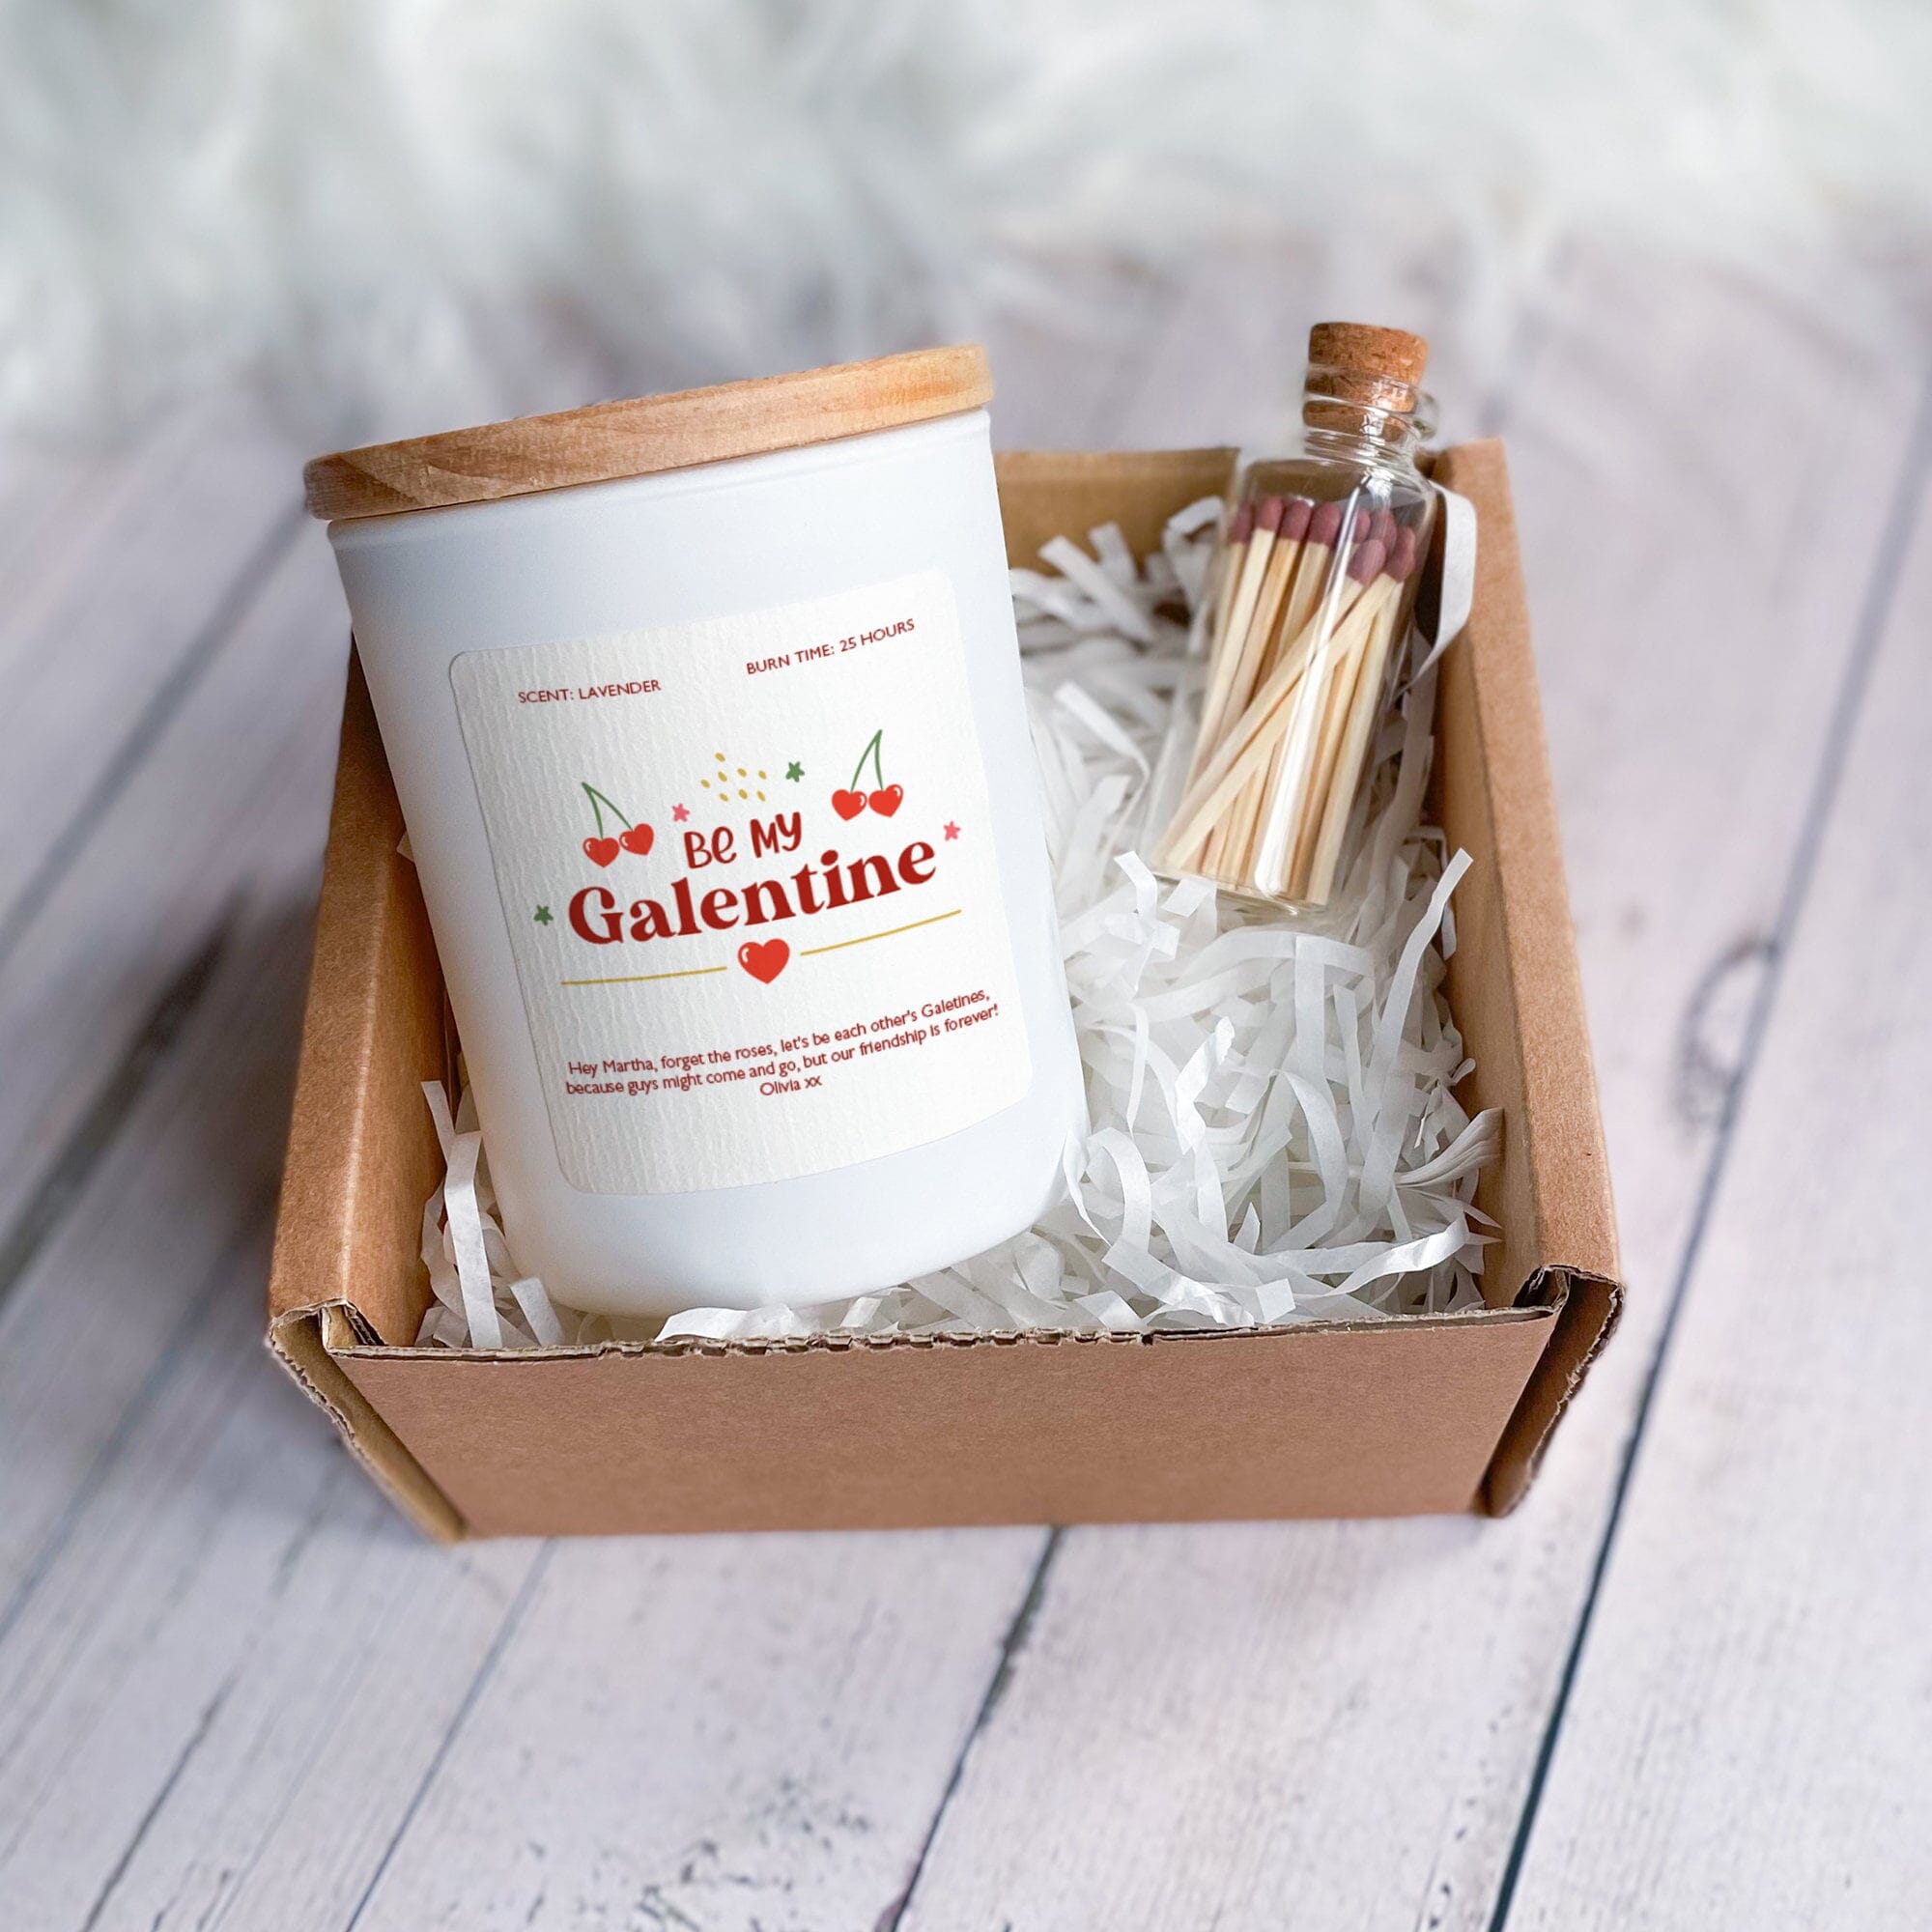 Be My Galentine Candle Gift For Friend Gift For Her Him Soy Wax Candle Vegan Happy Galentines Gift